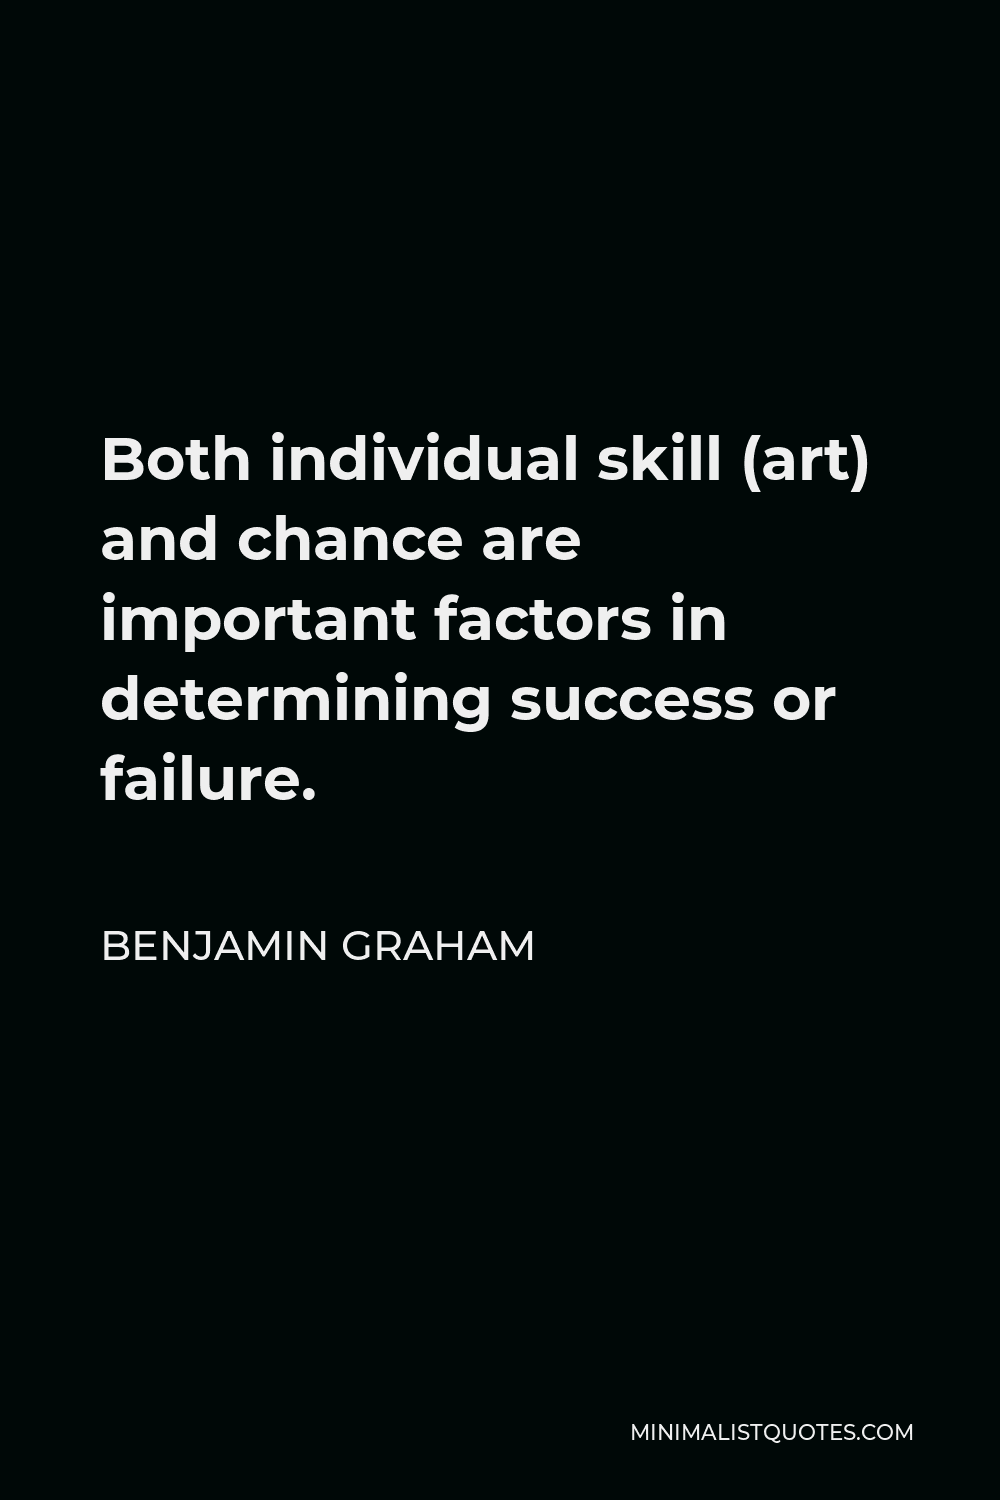 Benjamin Graham Quote - Both individual skill (art) and chance are important factors in determining success or failure.